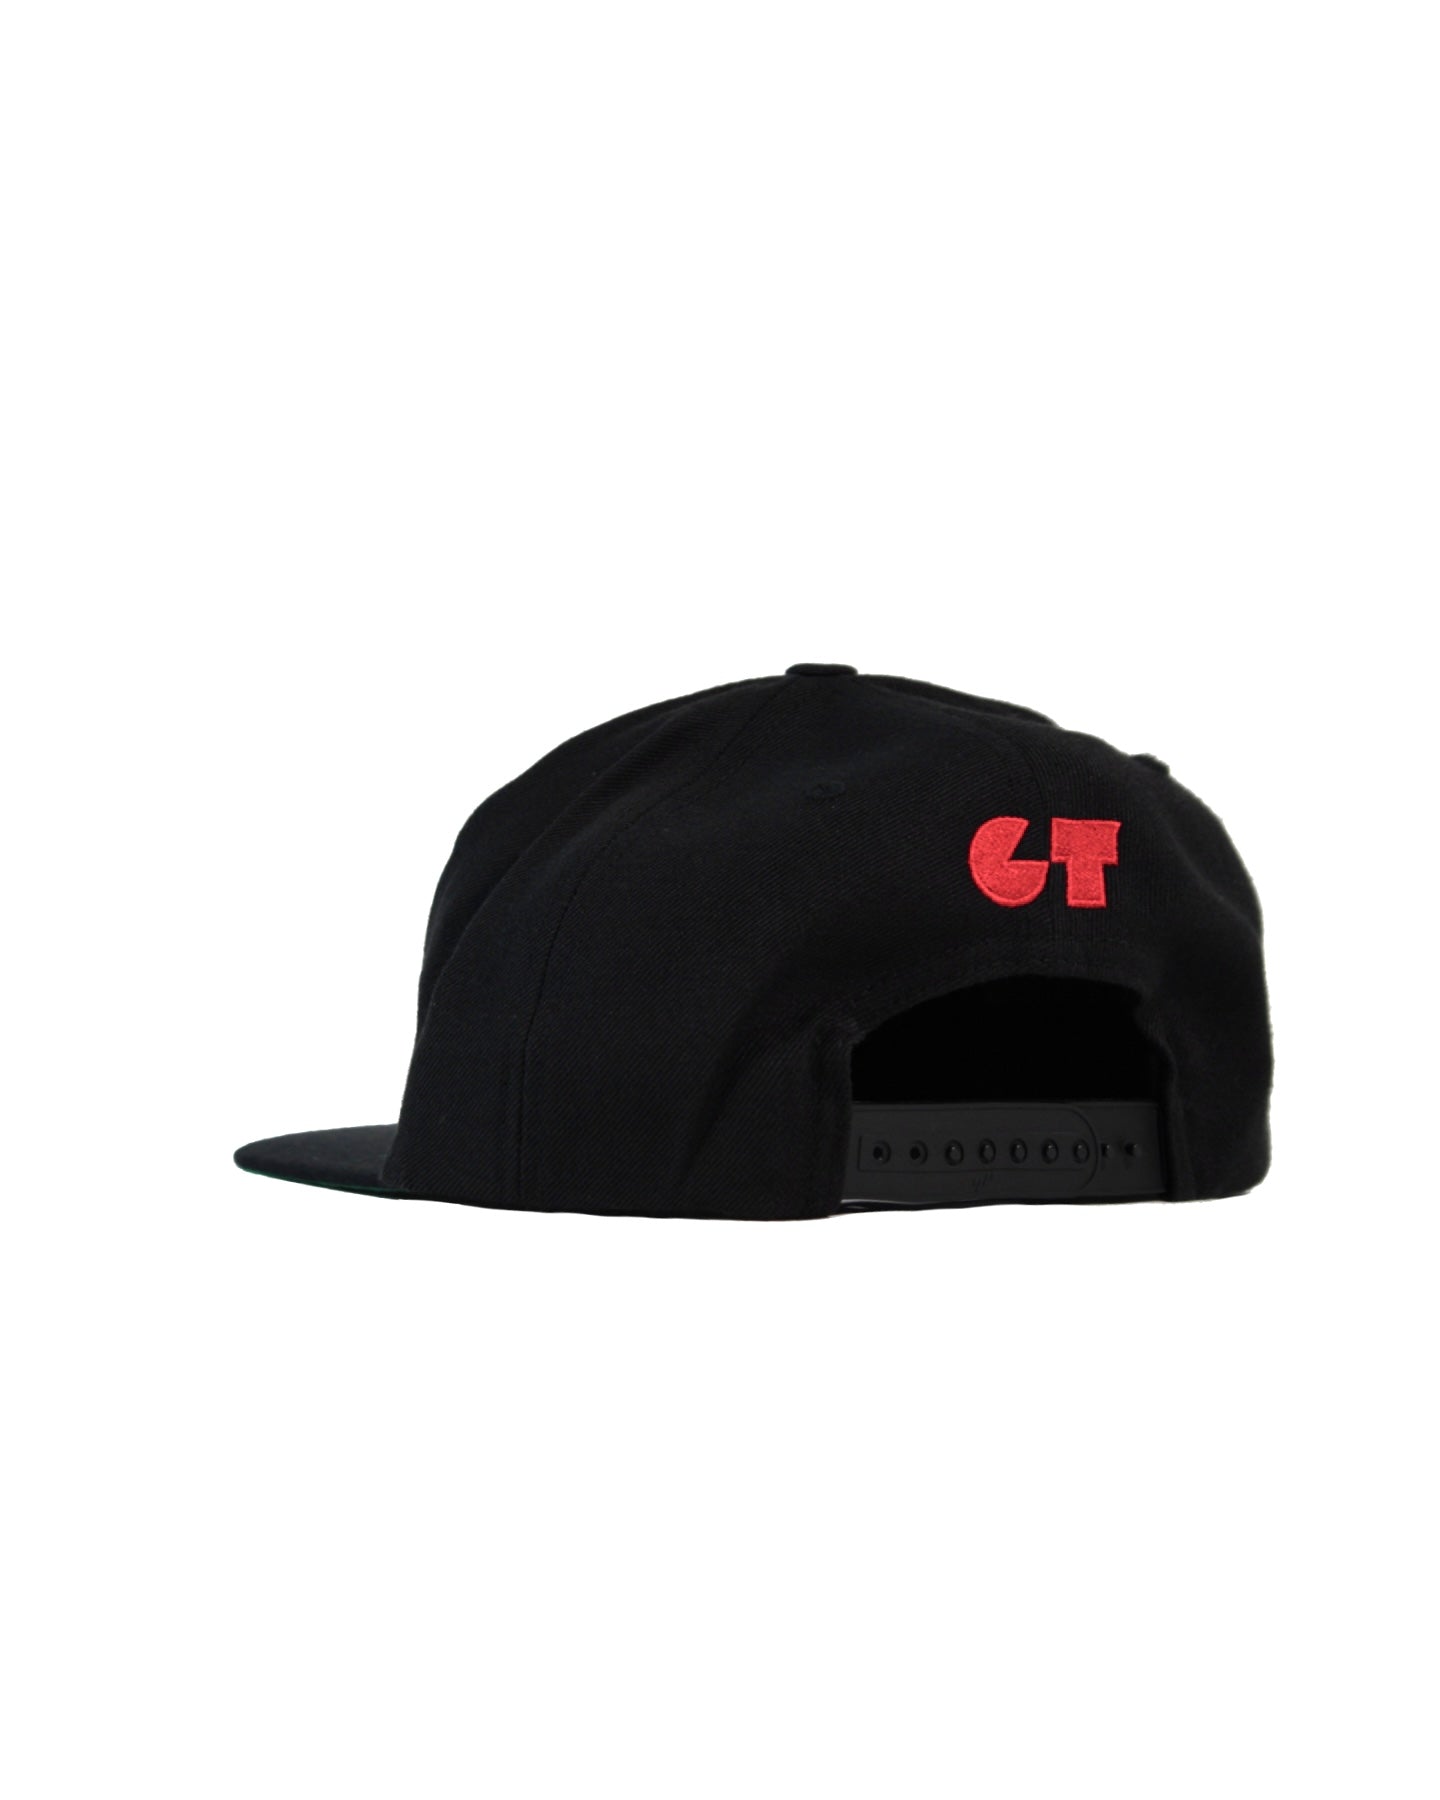 Embroidered Snapback Black/Red